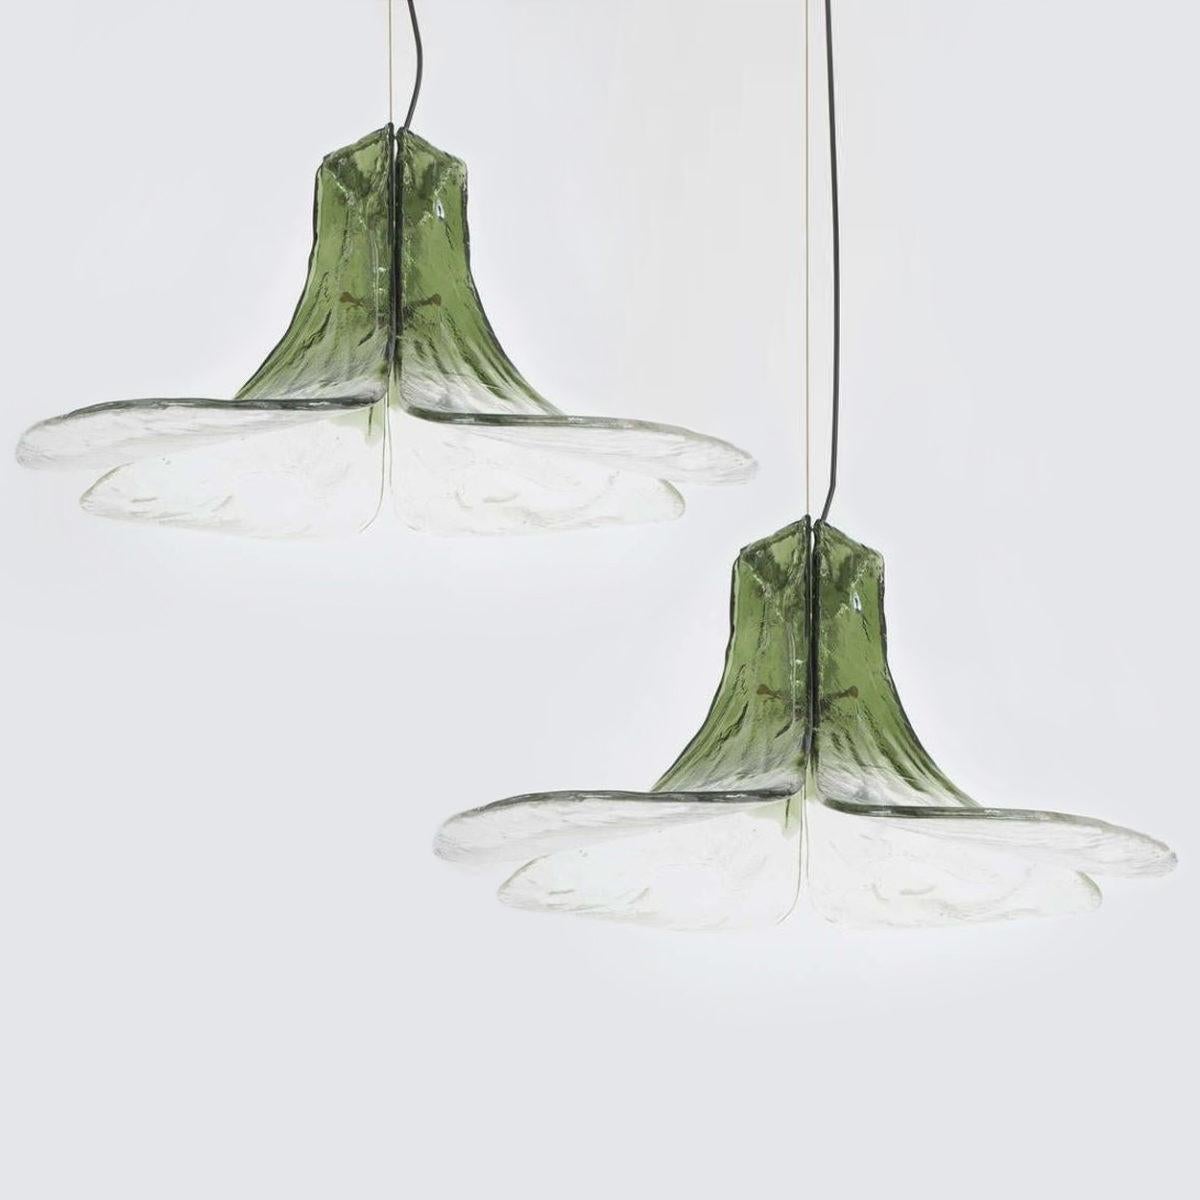 Pendant lamps model LS185 by Carlo Nason for Mazzega.
Four crystal clear and green leaves compose this beautiful piece made in thick handmade Murano glass.

Measures: H 16.93” (43 cm), D 23.62